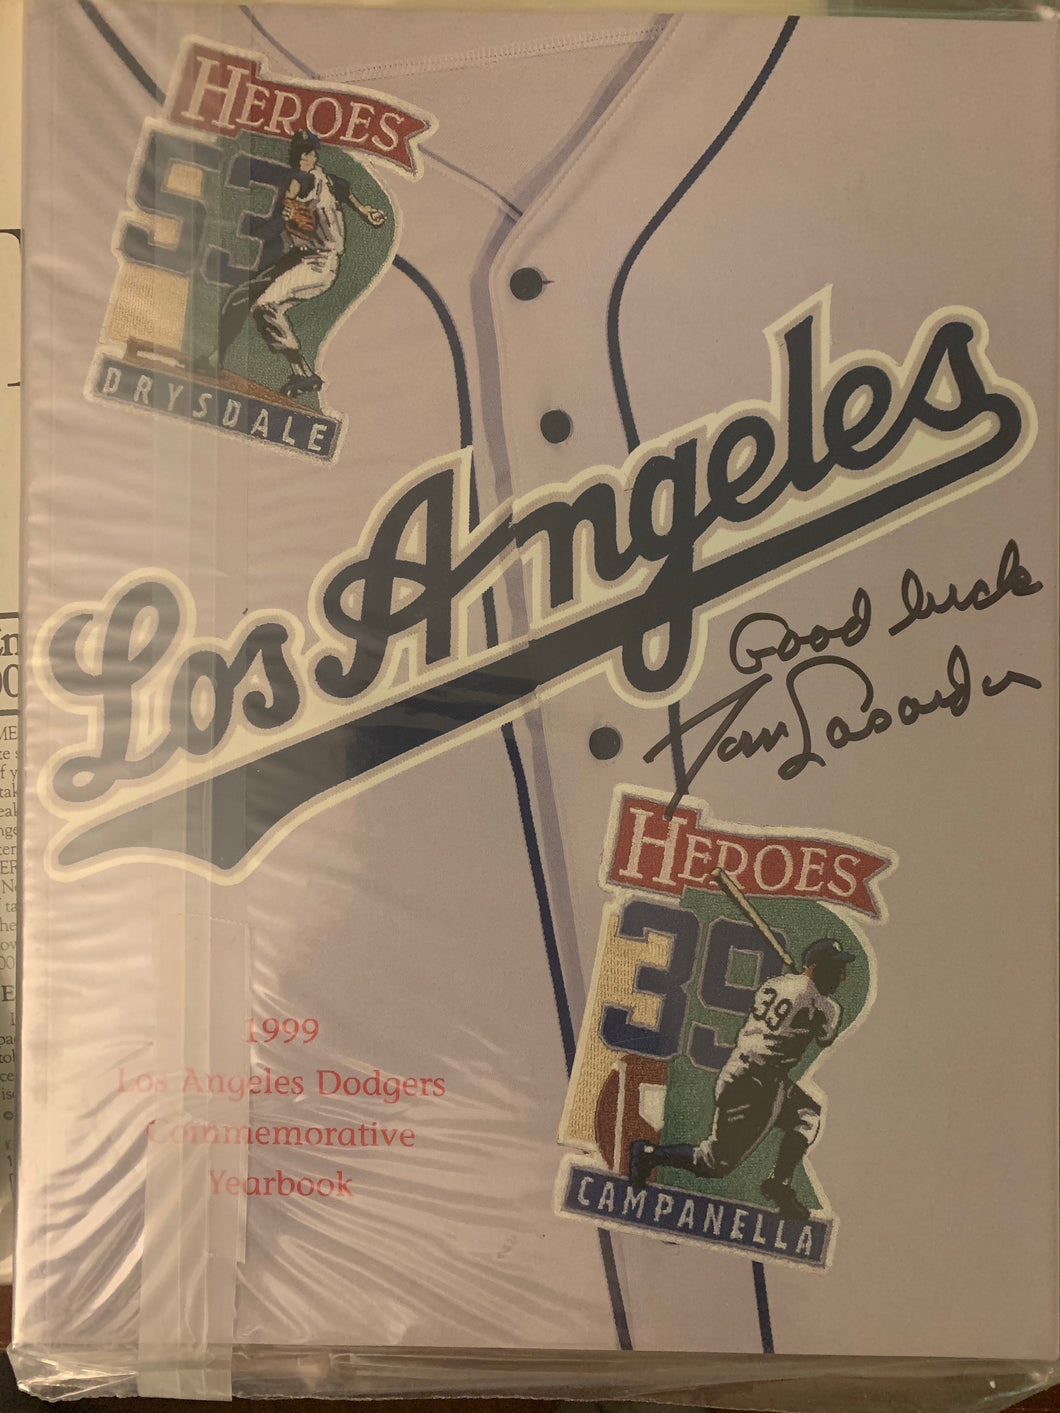 Tommy Lasorda Signed Yearbook